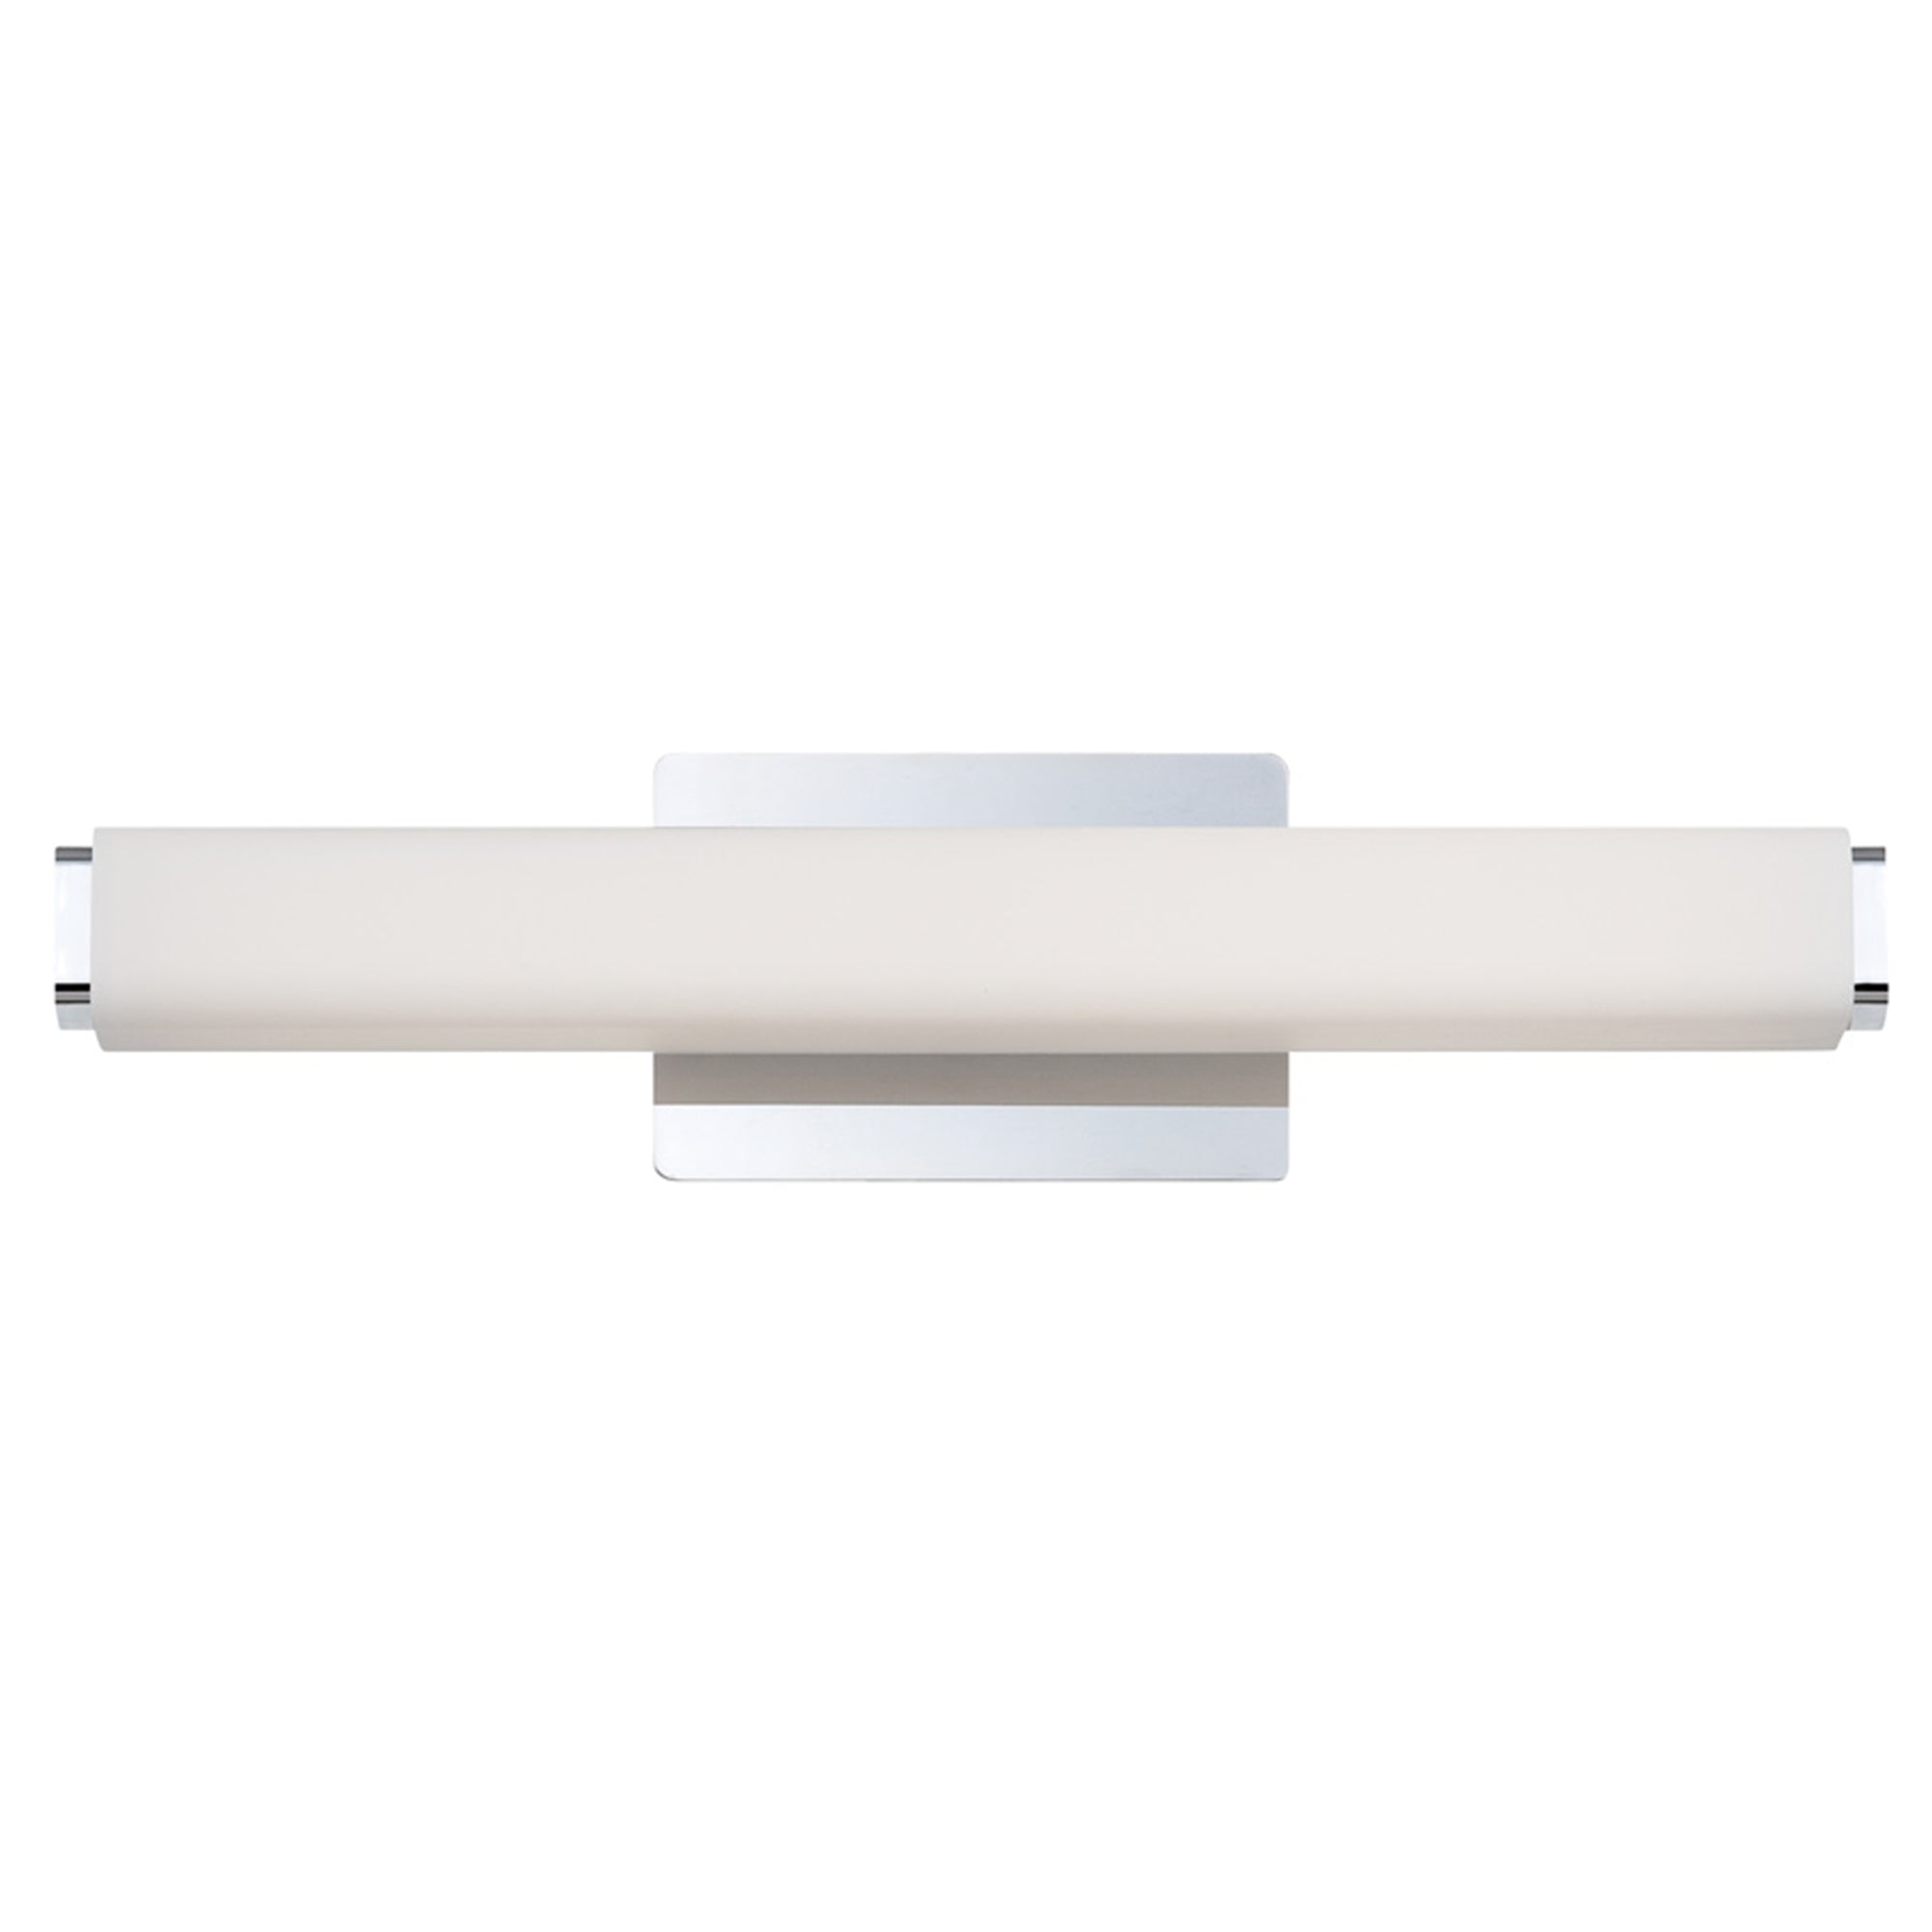 VOGUE Bathroom sconce Chrome INTEGRATED LED - WS-3120-CH | MODERN FORMS